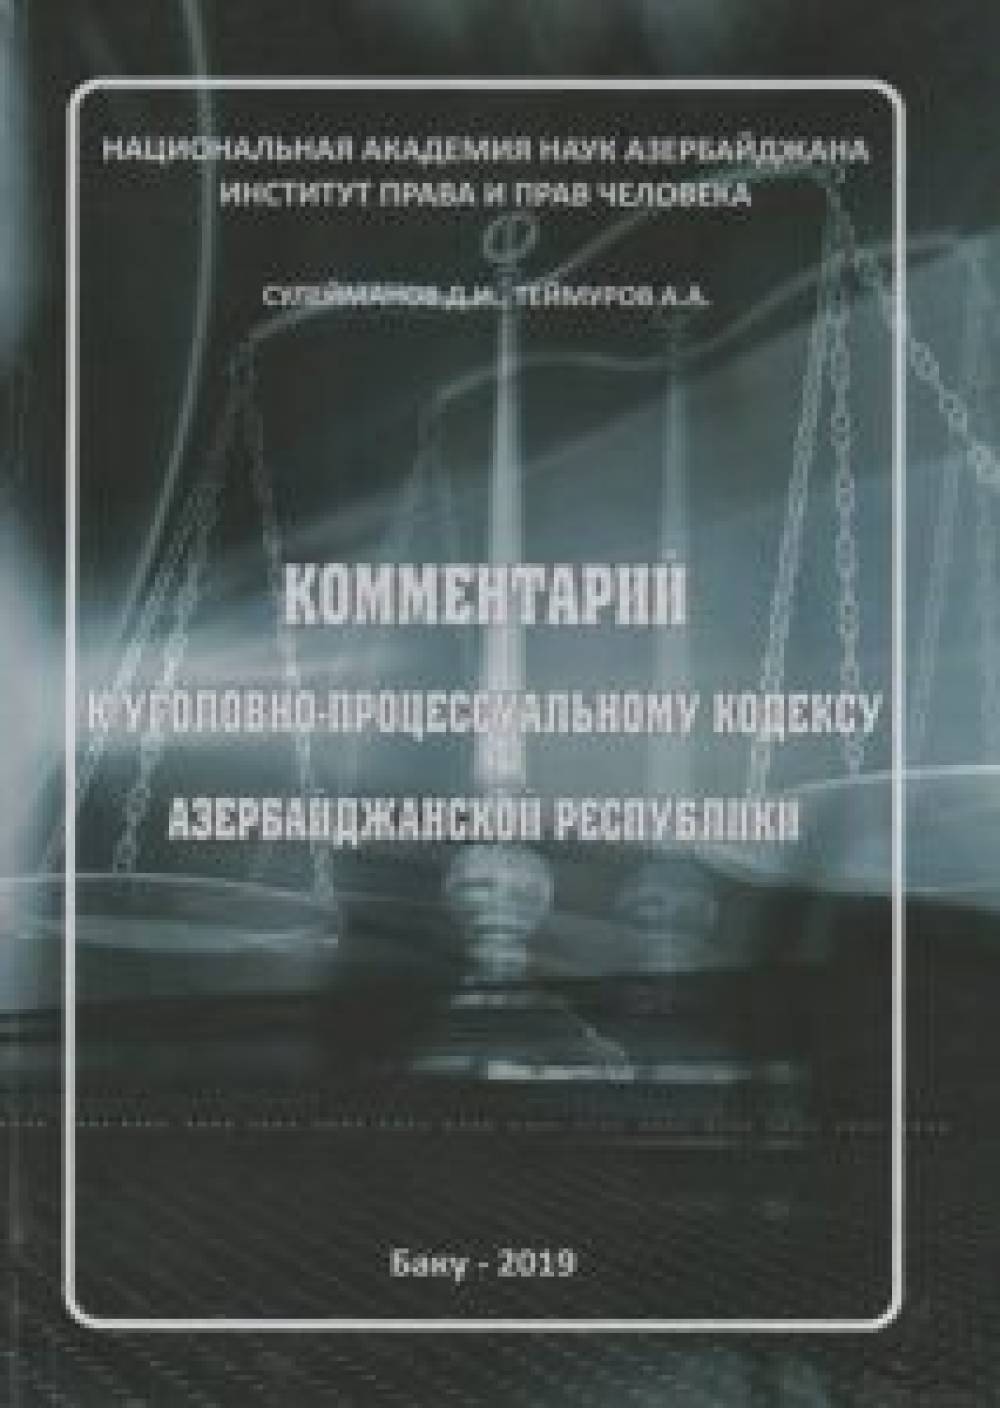 Suleymanov C.I. and; Teymurov A. A "Comment for the criminal procedure code of the azerbaijan republic"